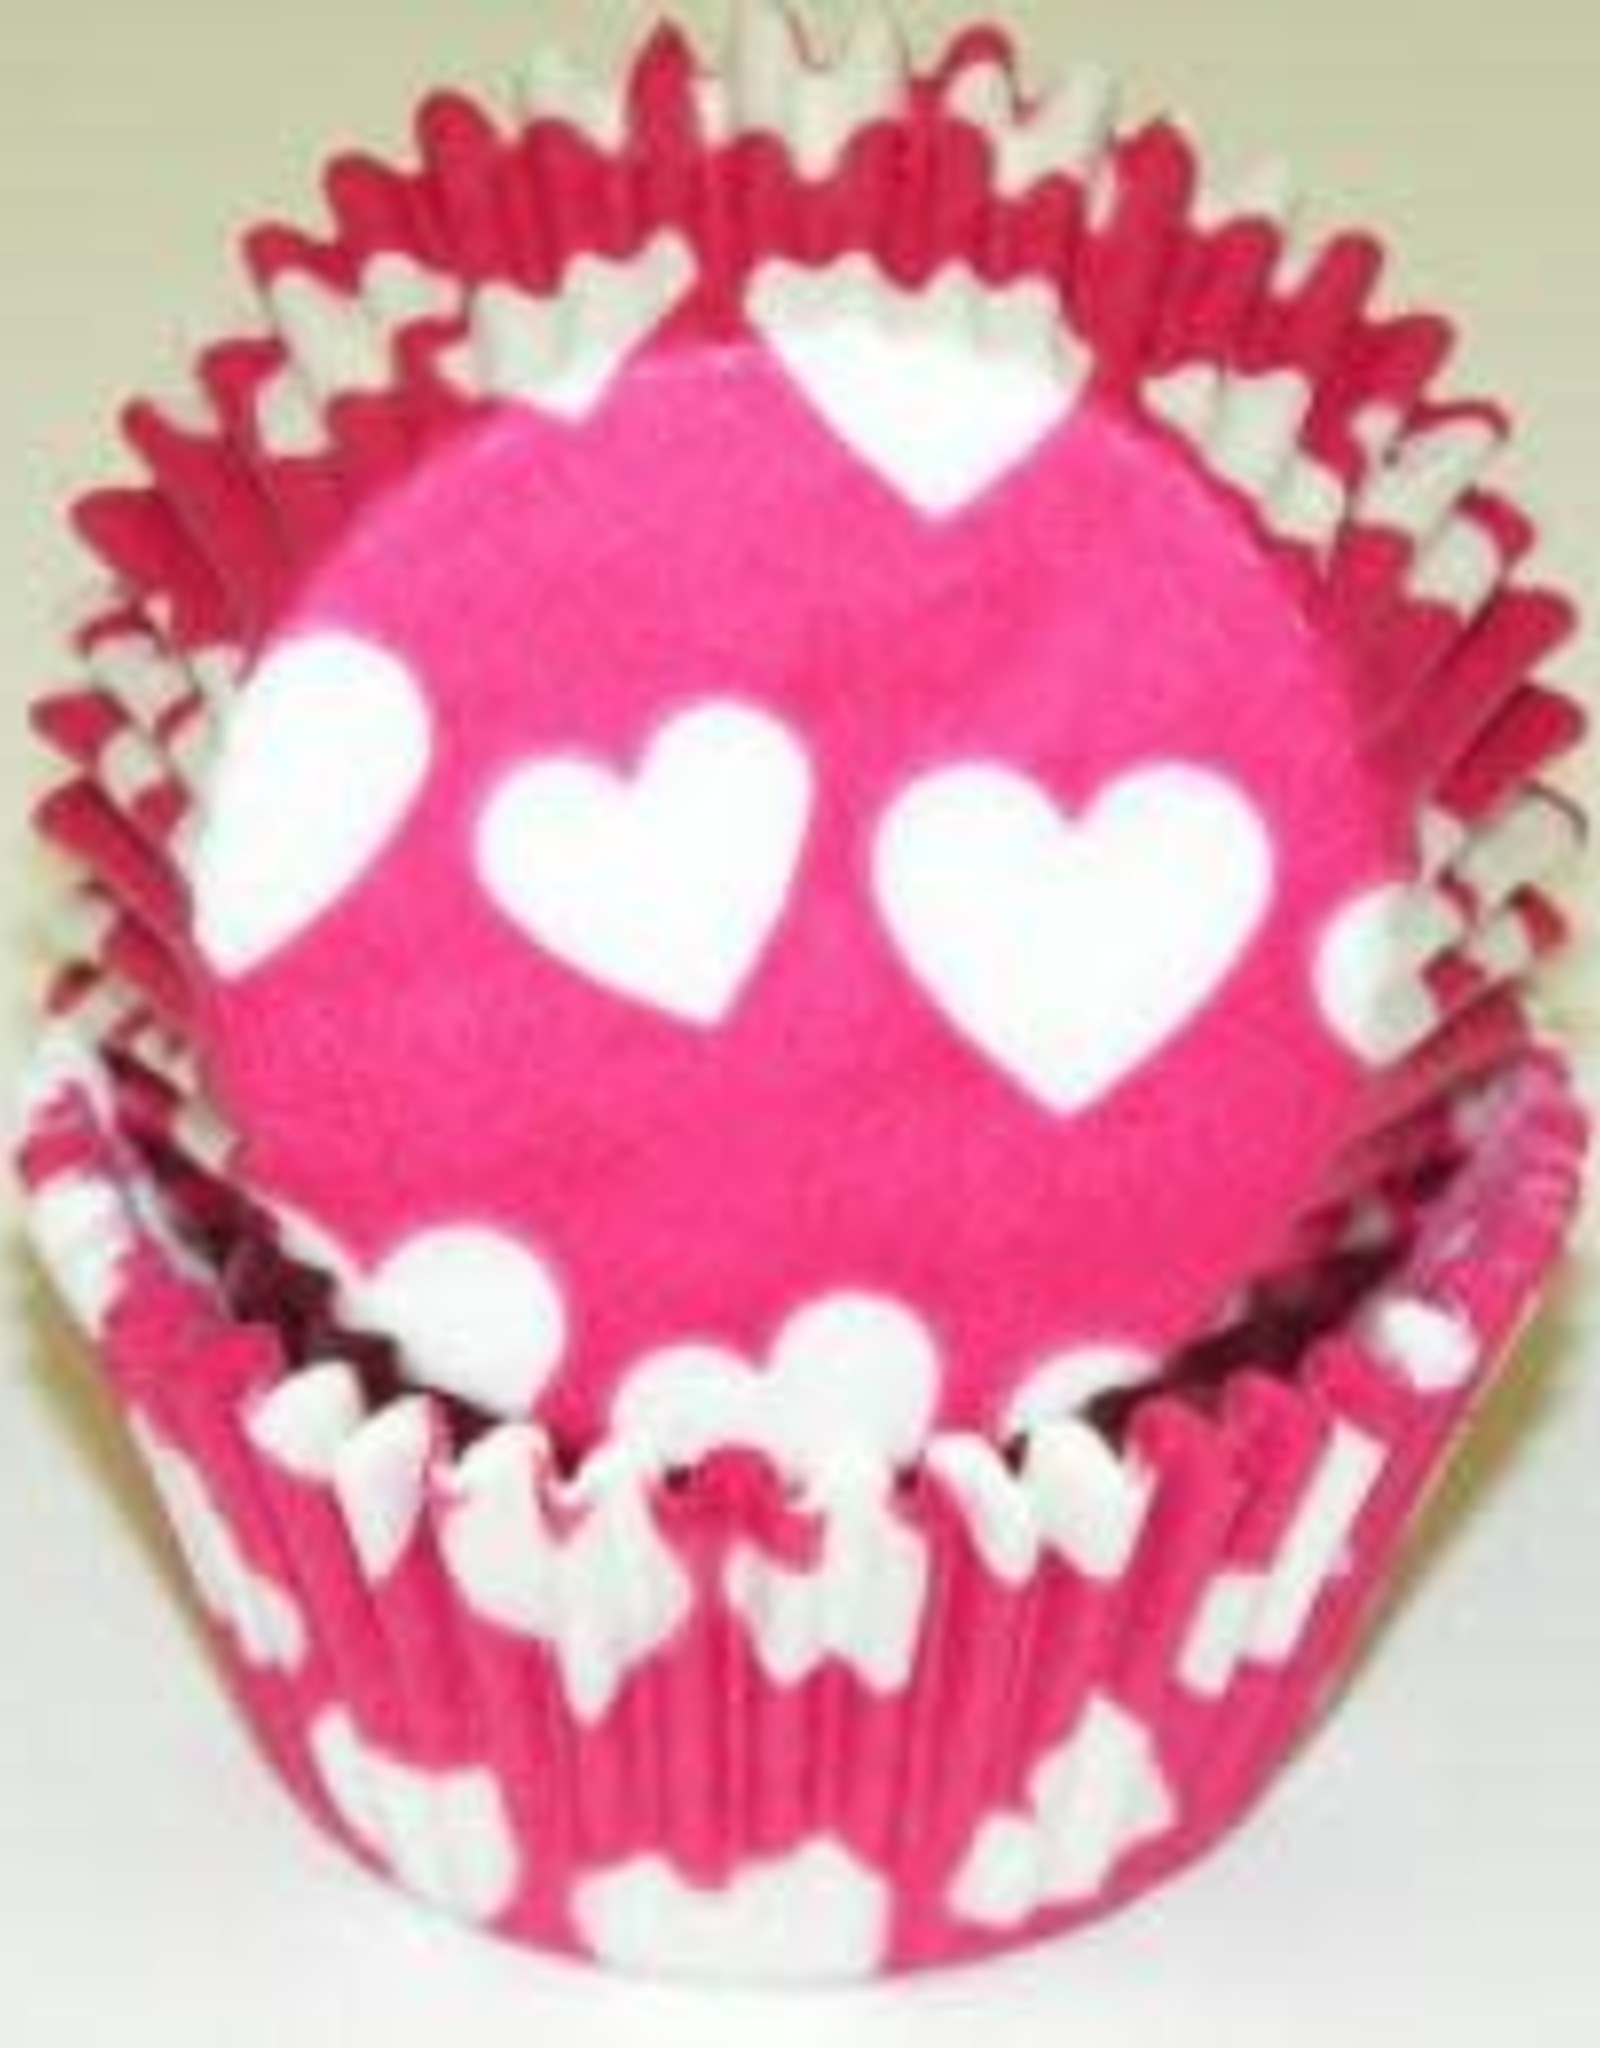 Pink Heart Baking Cups(30-40ct)